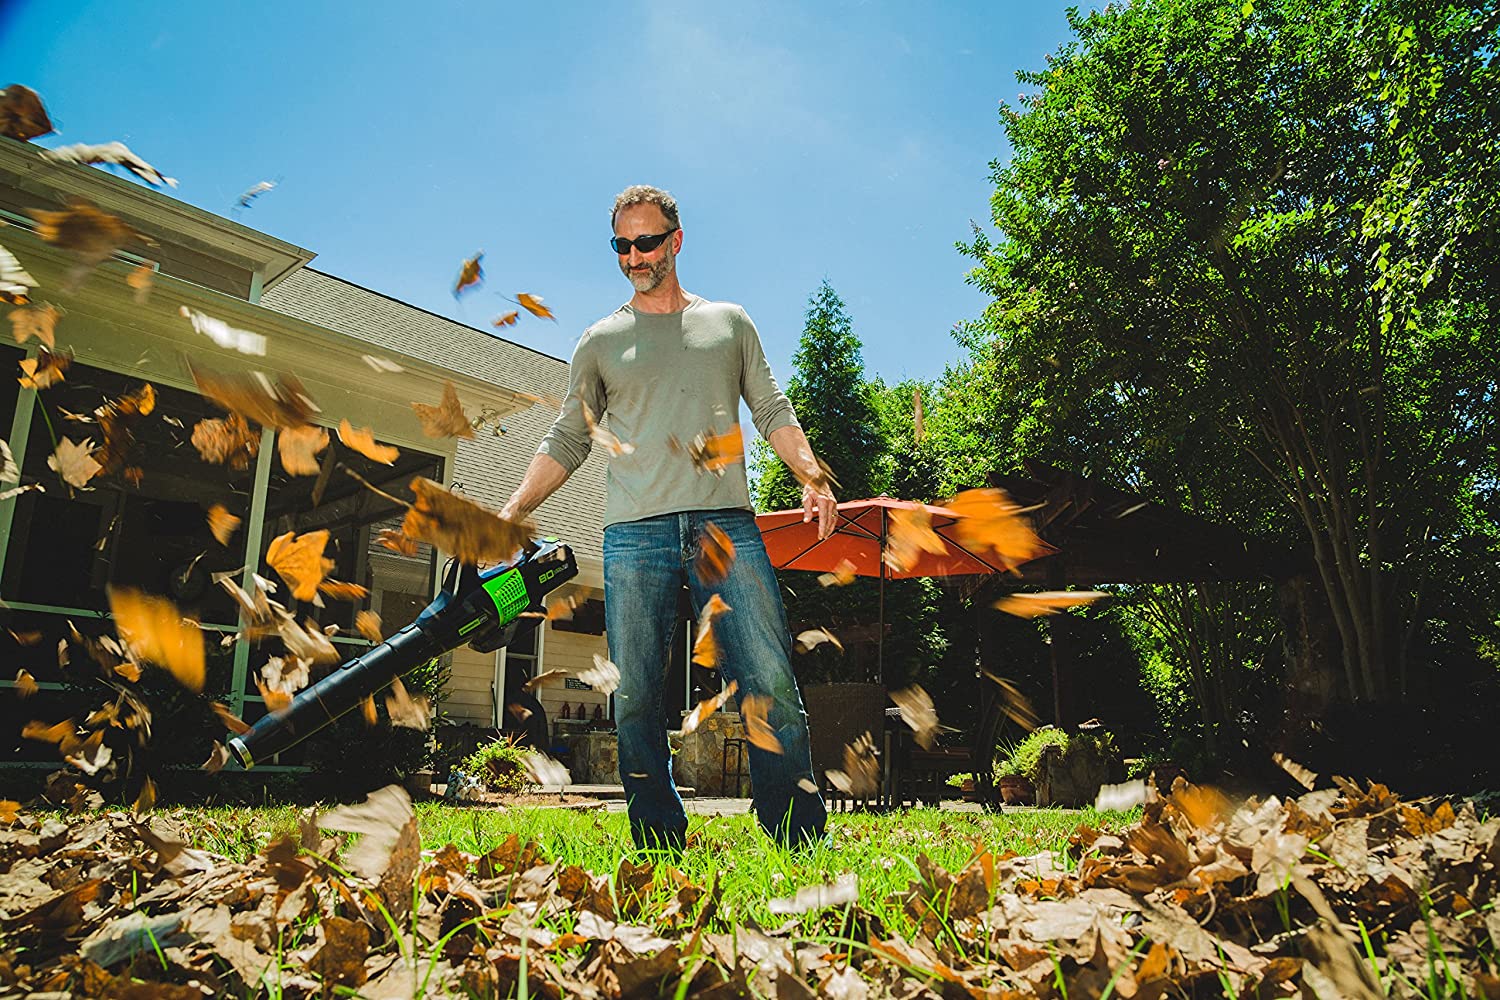 A person using the best cordless blower option to clear leaves from a yard